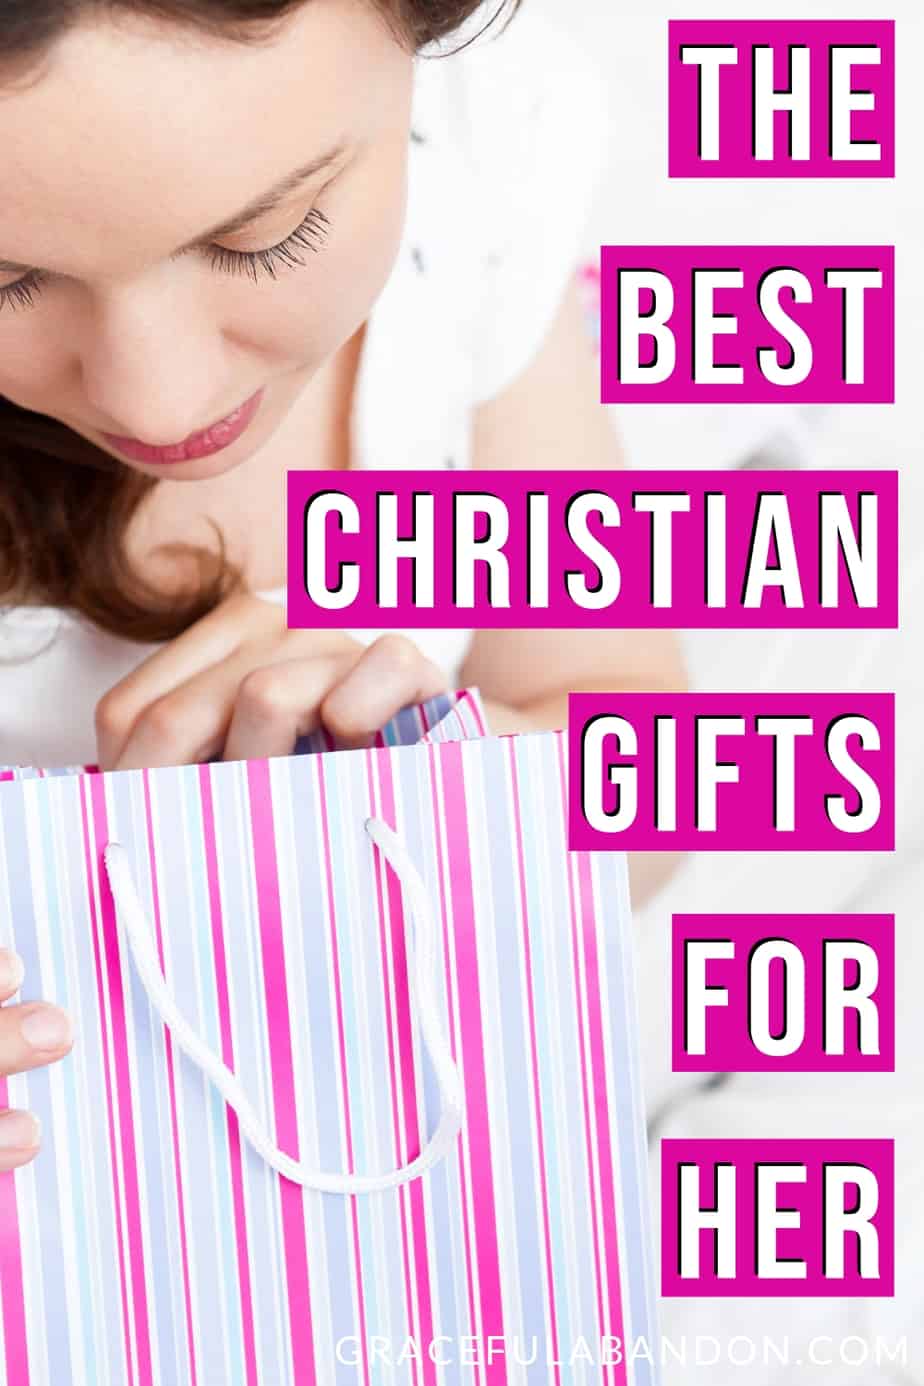 The Best Gifts For Christian Women Unique Christian Gifts She’ll Adore